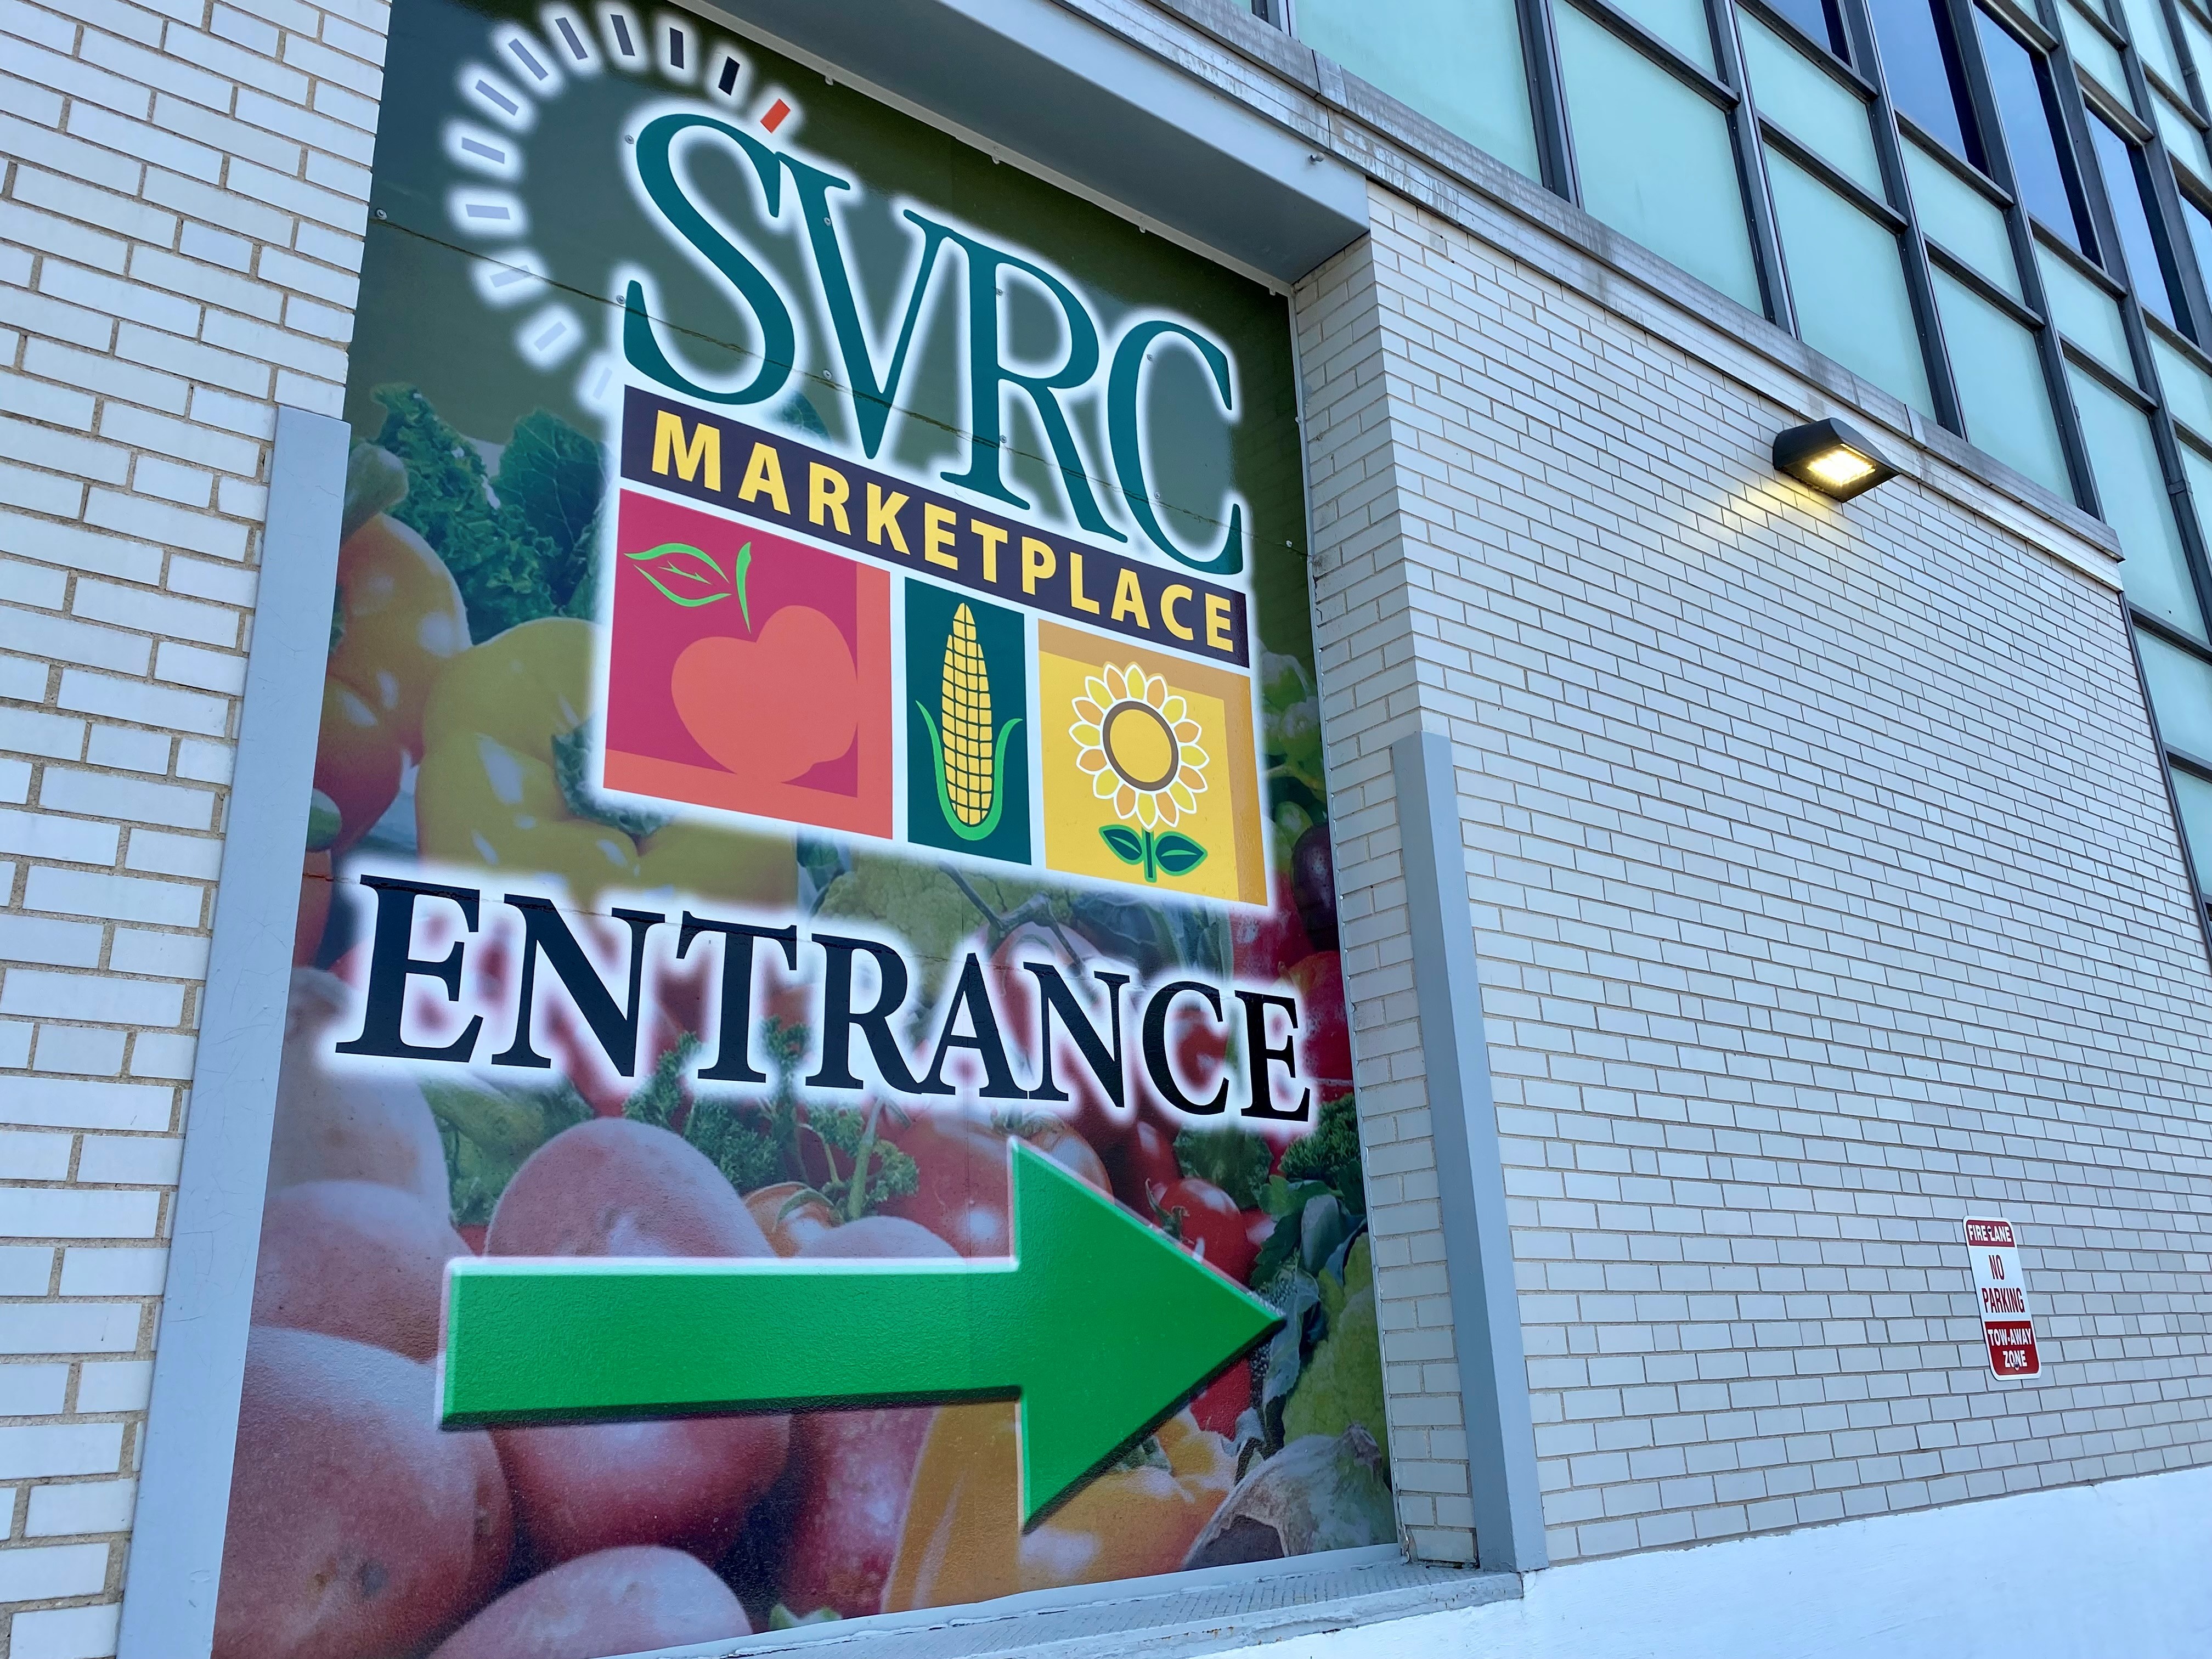 Crudups, other new businesses coming soon to downtown Saginaws SVRC Marketplace picture